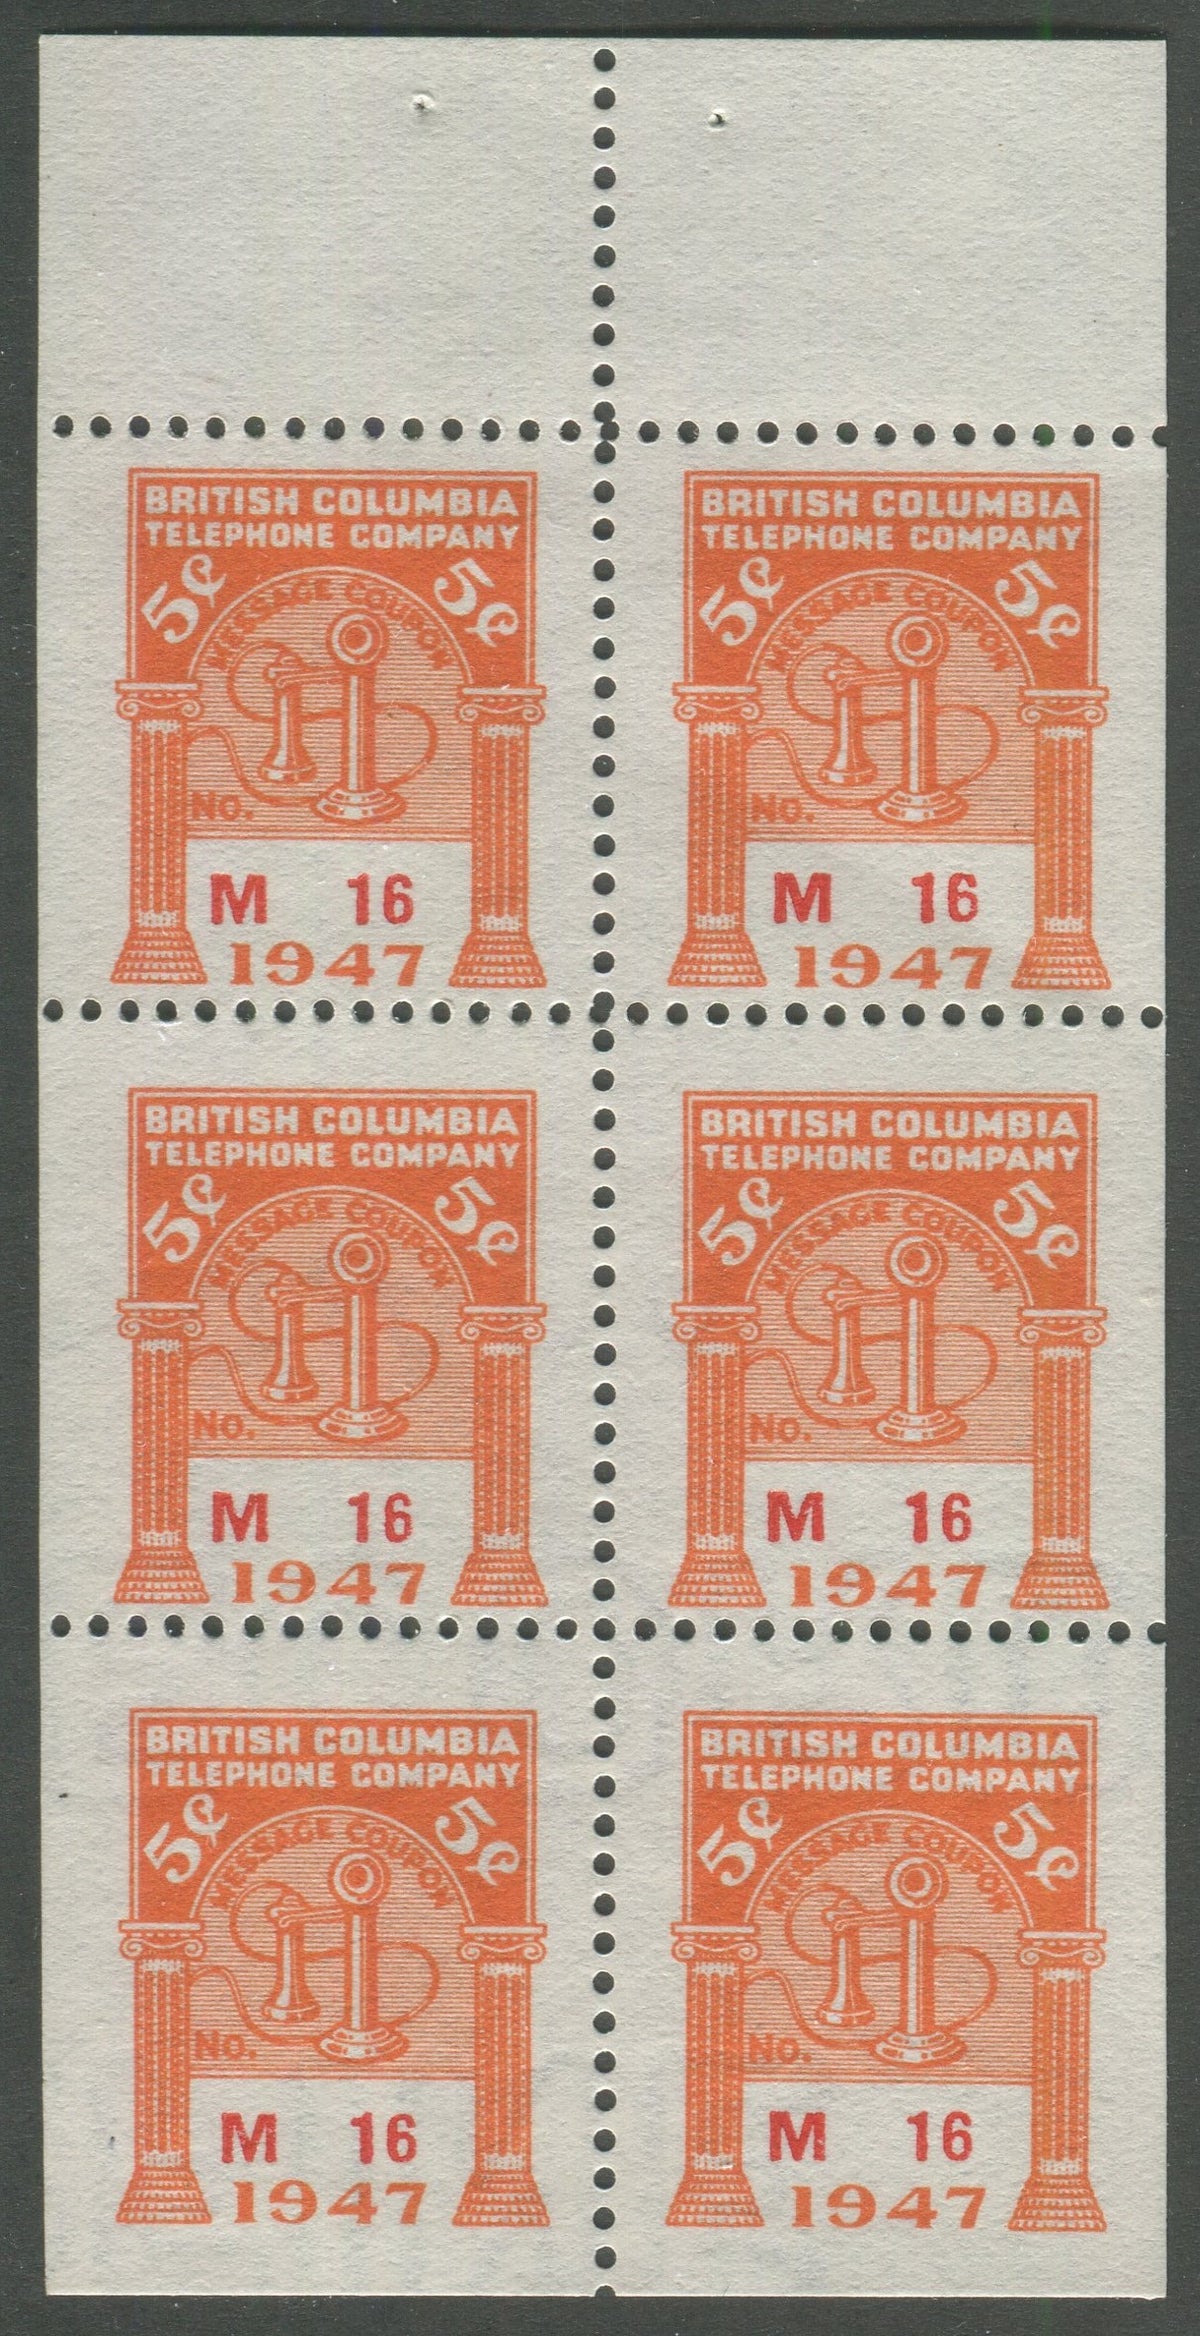 0249BC2401 - BCT151 - Mint Booklet Pane, Watermarked